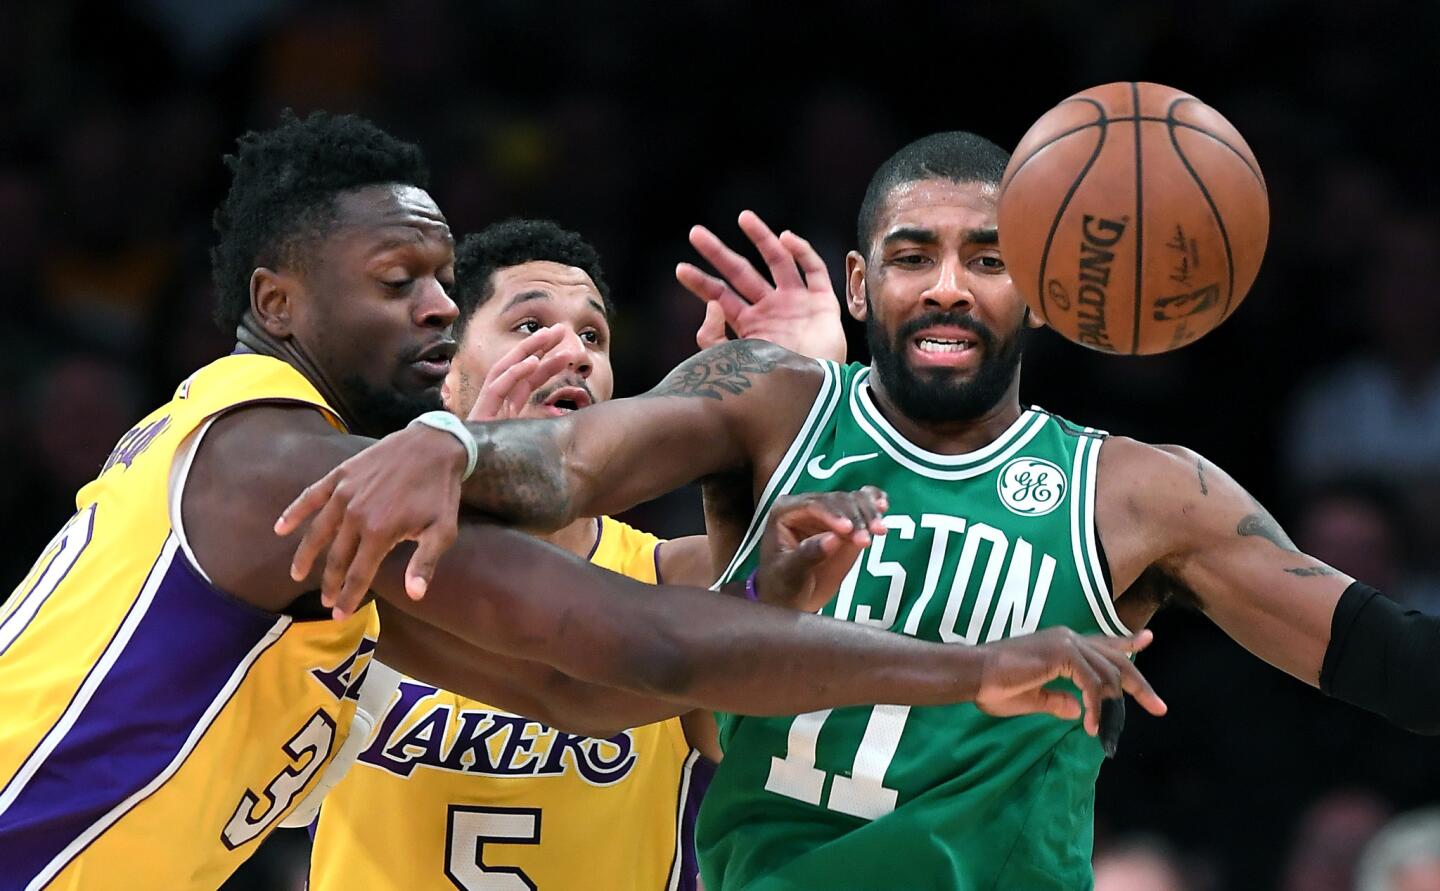 Lakers forward Julius Randle knocks the ball away form Celtics guard Kyrie Irving during the fourth quarter of a game Tuesday at Staples Center.